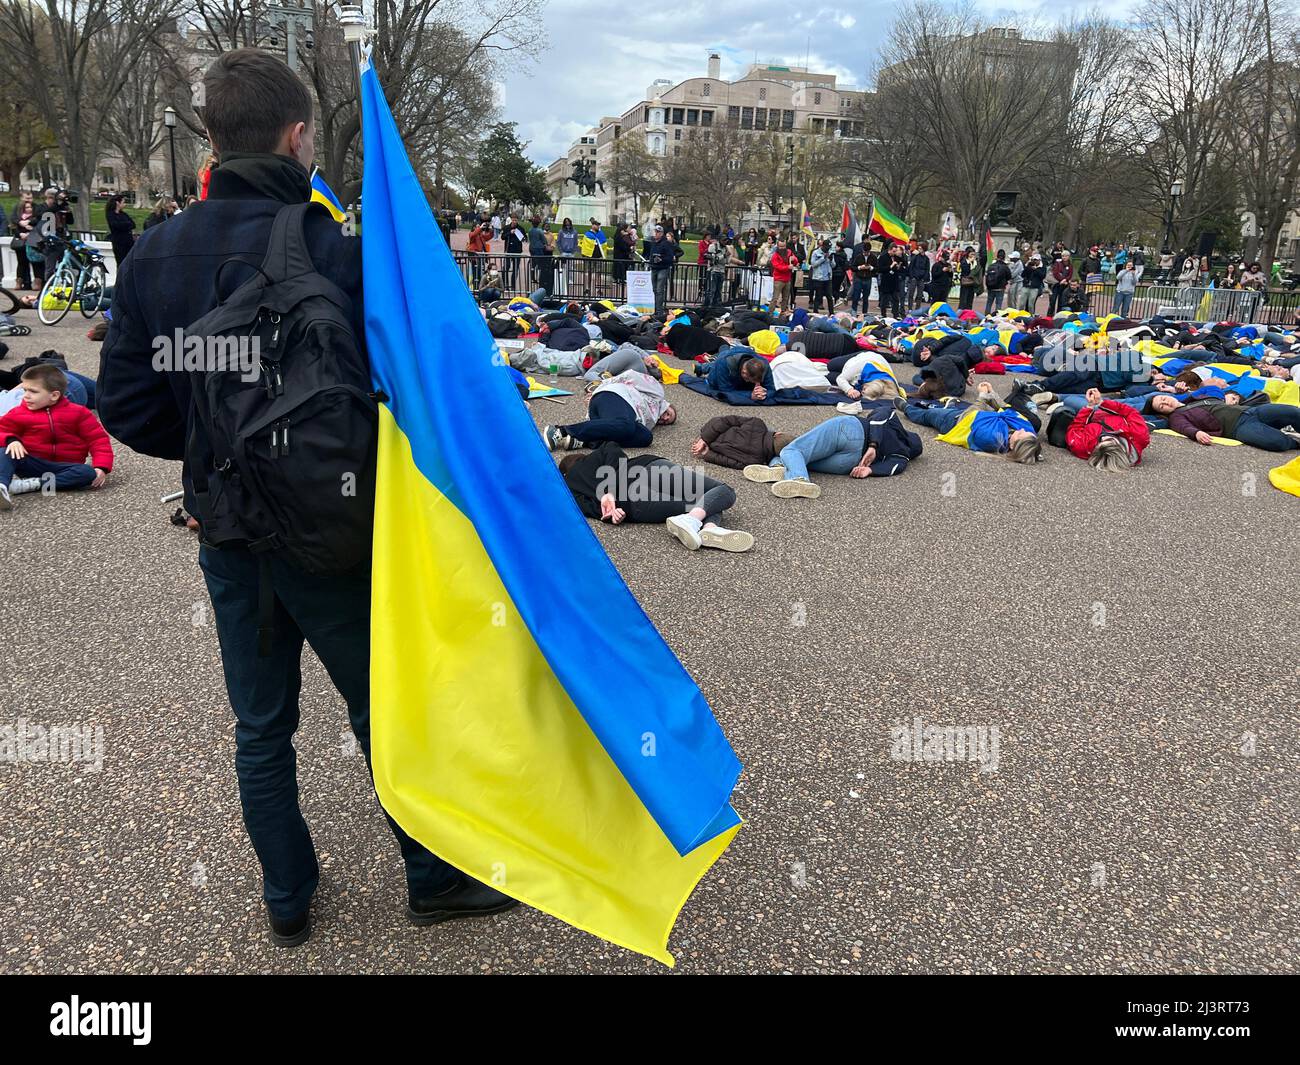 09 April 2022 Washington DC USA Supporters for Ukraine stage demonstration in front of The White house lying on the ground to simulate the dead as names of the dead were dead a!oud. Stock Photo